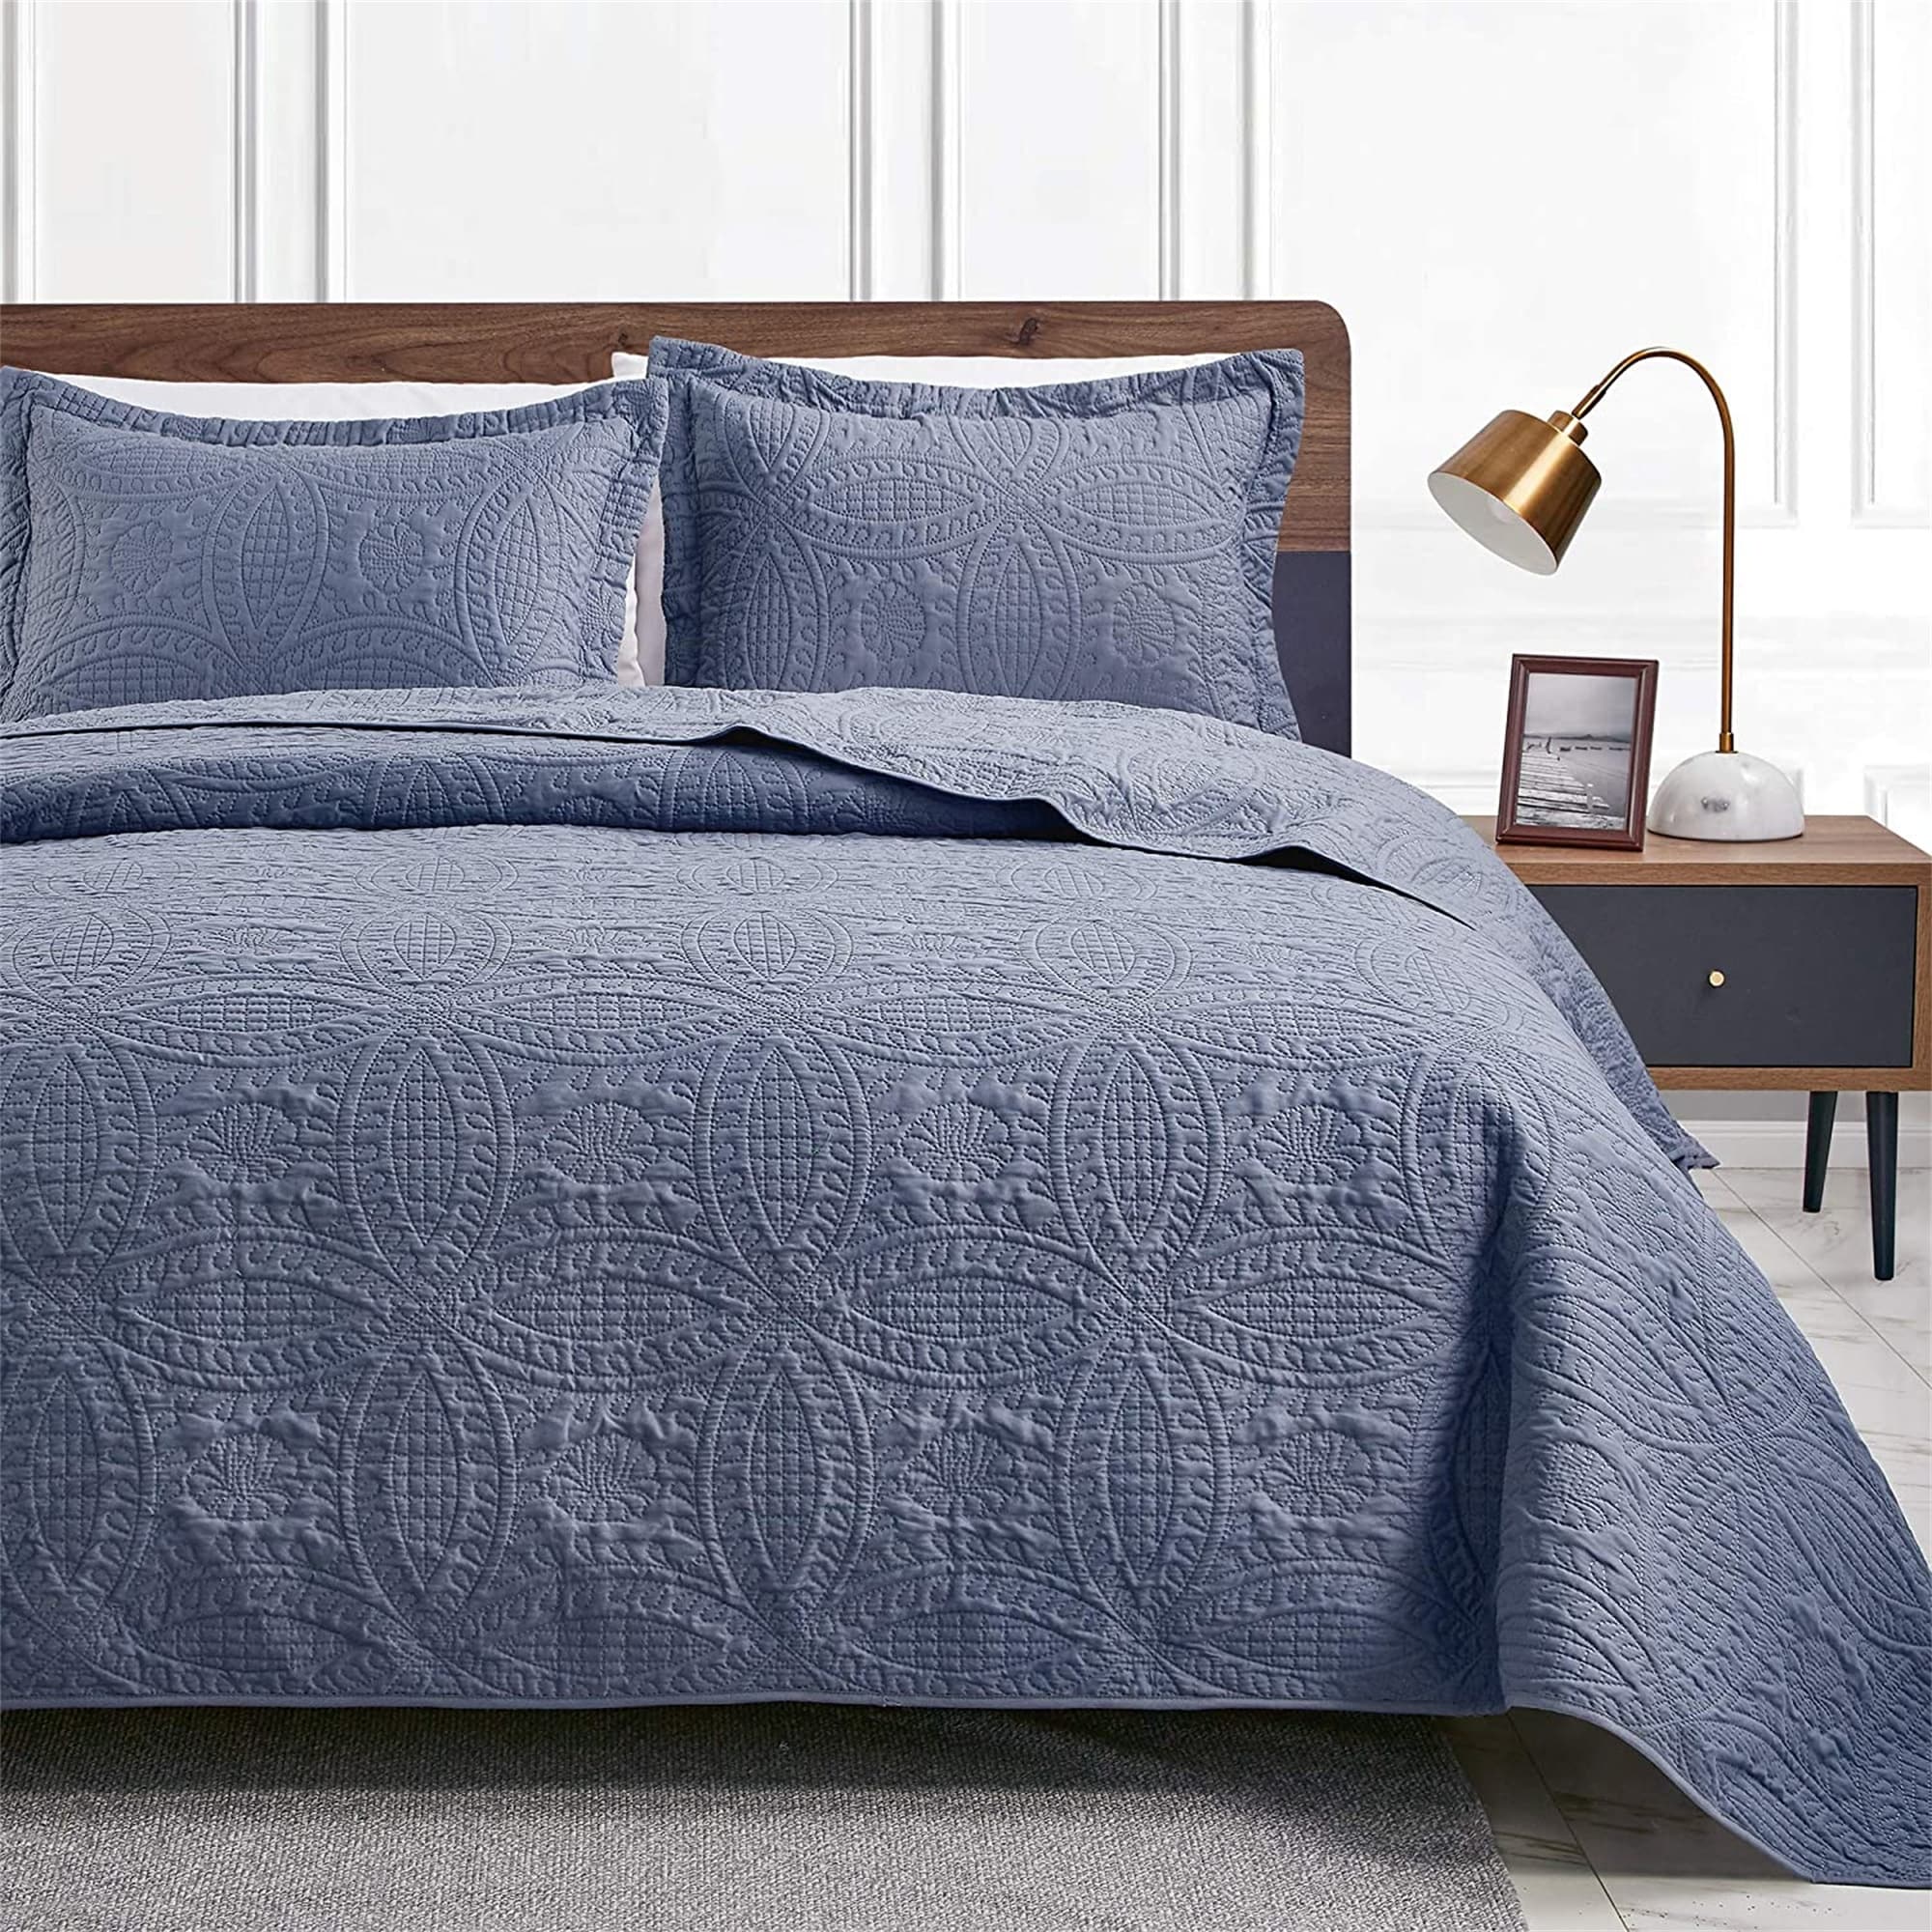 King Size Quilts and Bedspreads - Bed Bath & Beyond